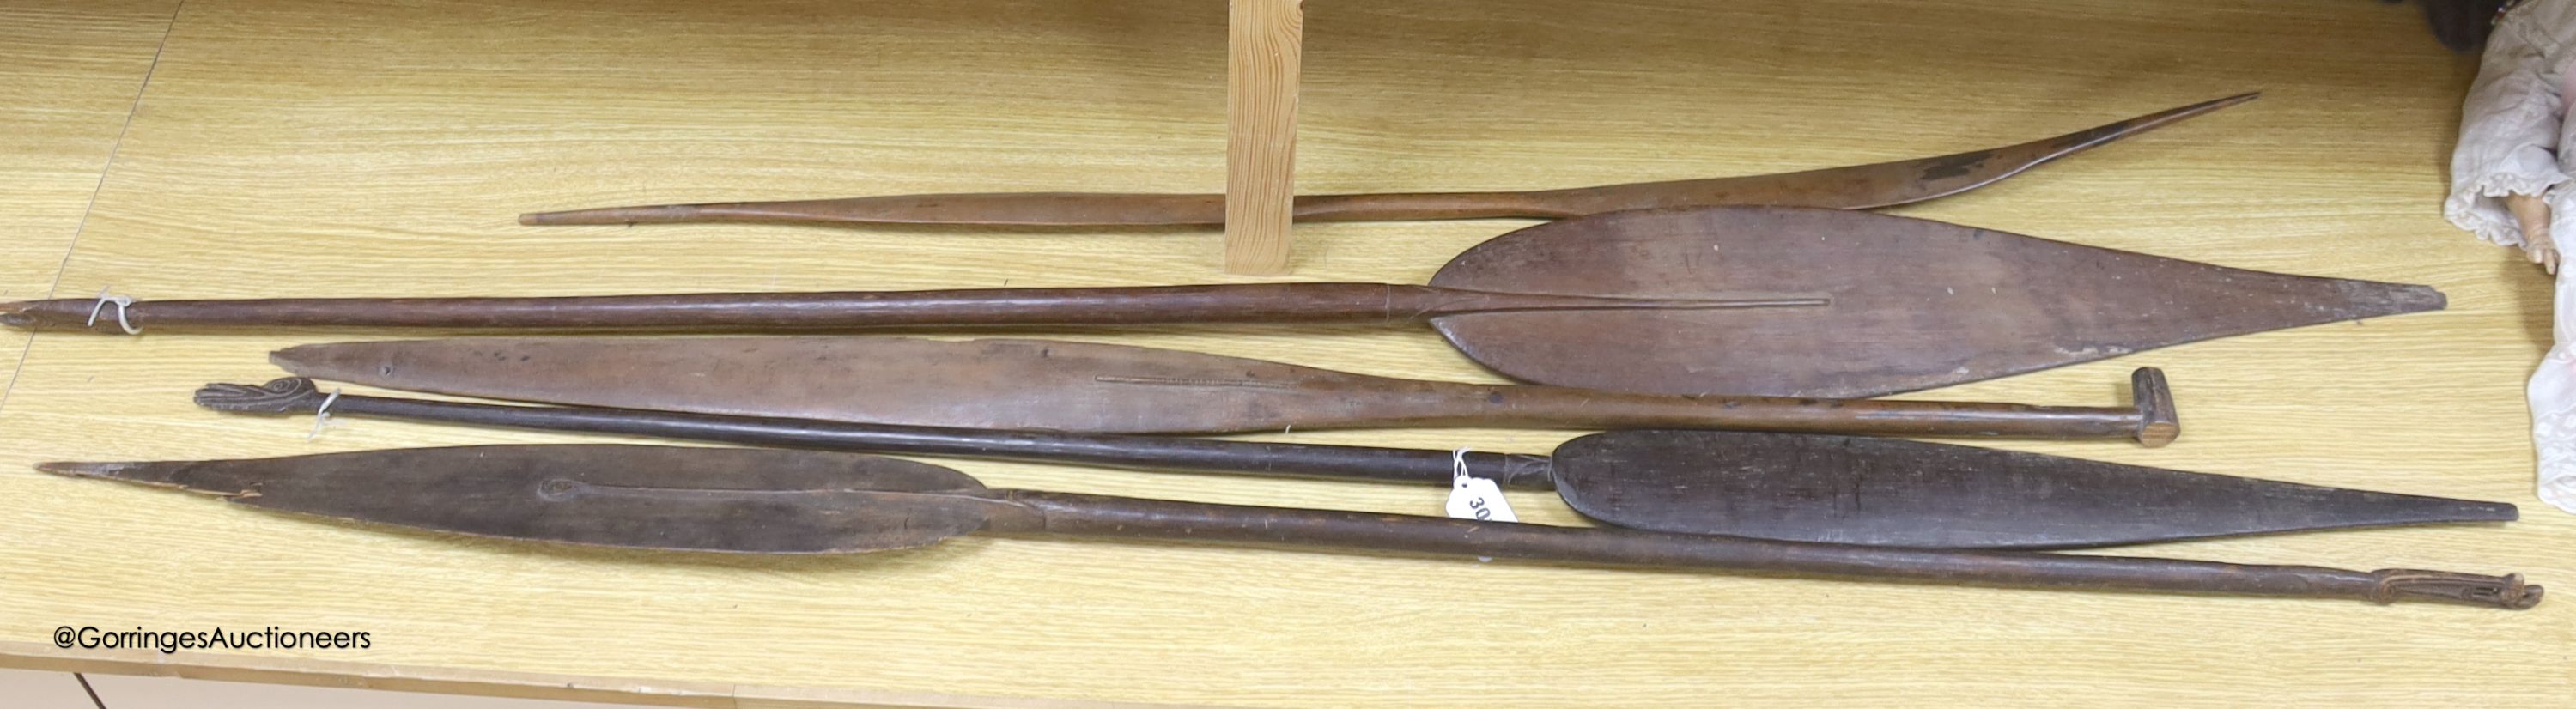 5 assorted paddle spears